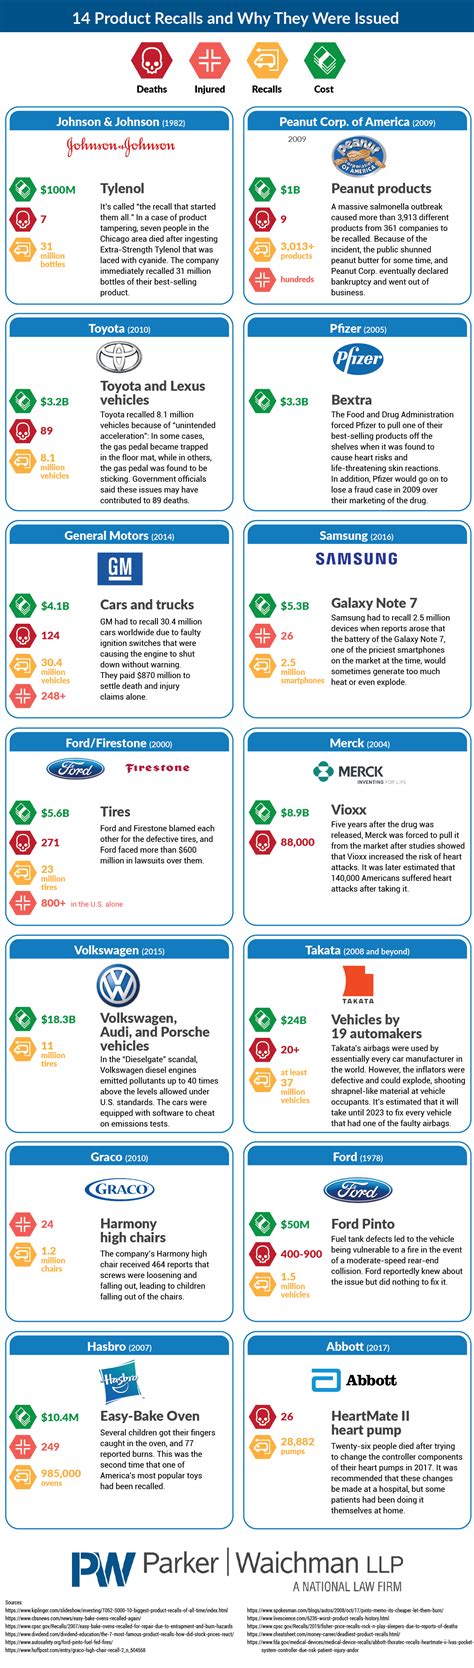 Chart Of 14 Of The Biggest Product Recalls Including Why They Were Issued Total Cost Number